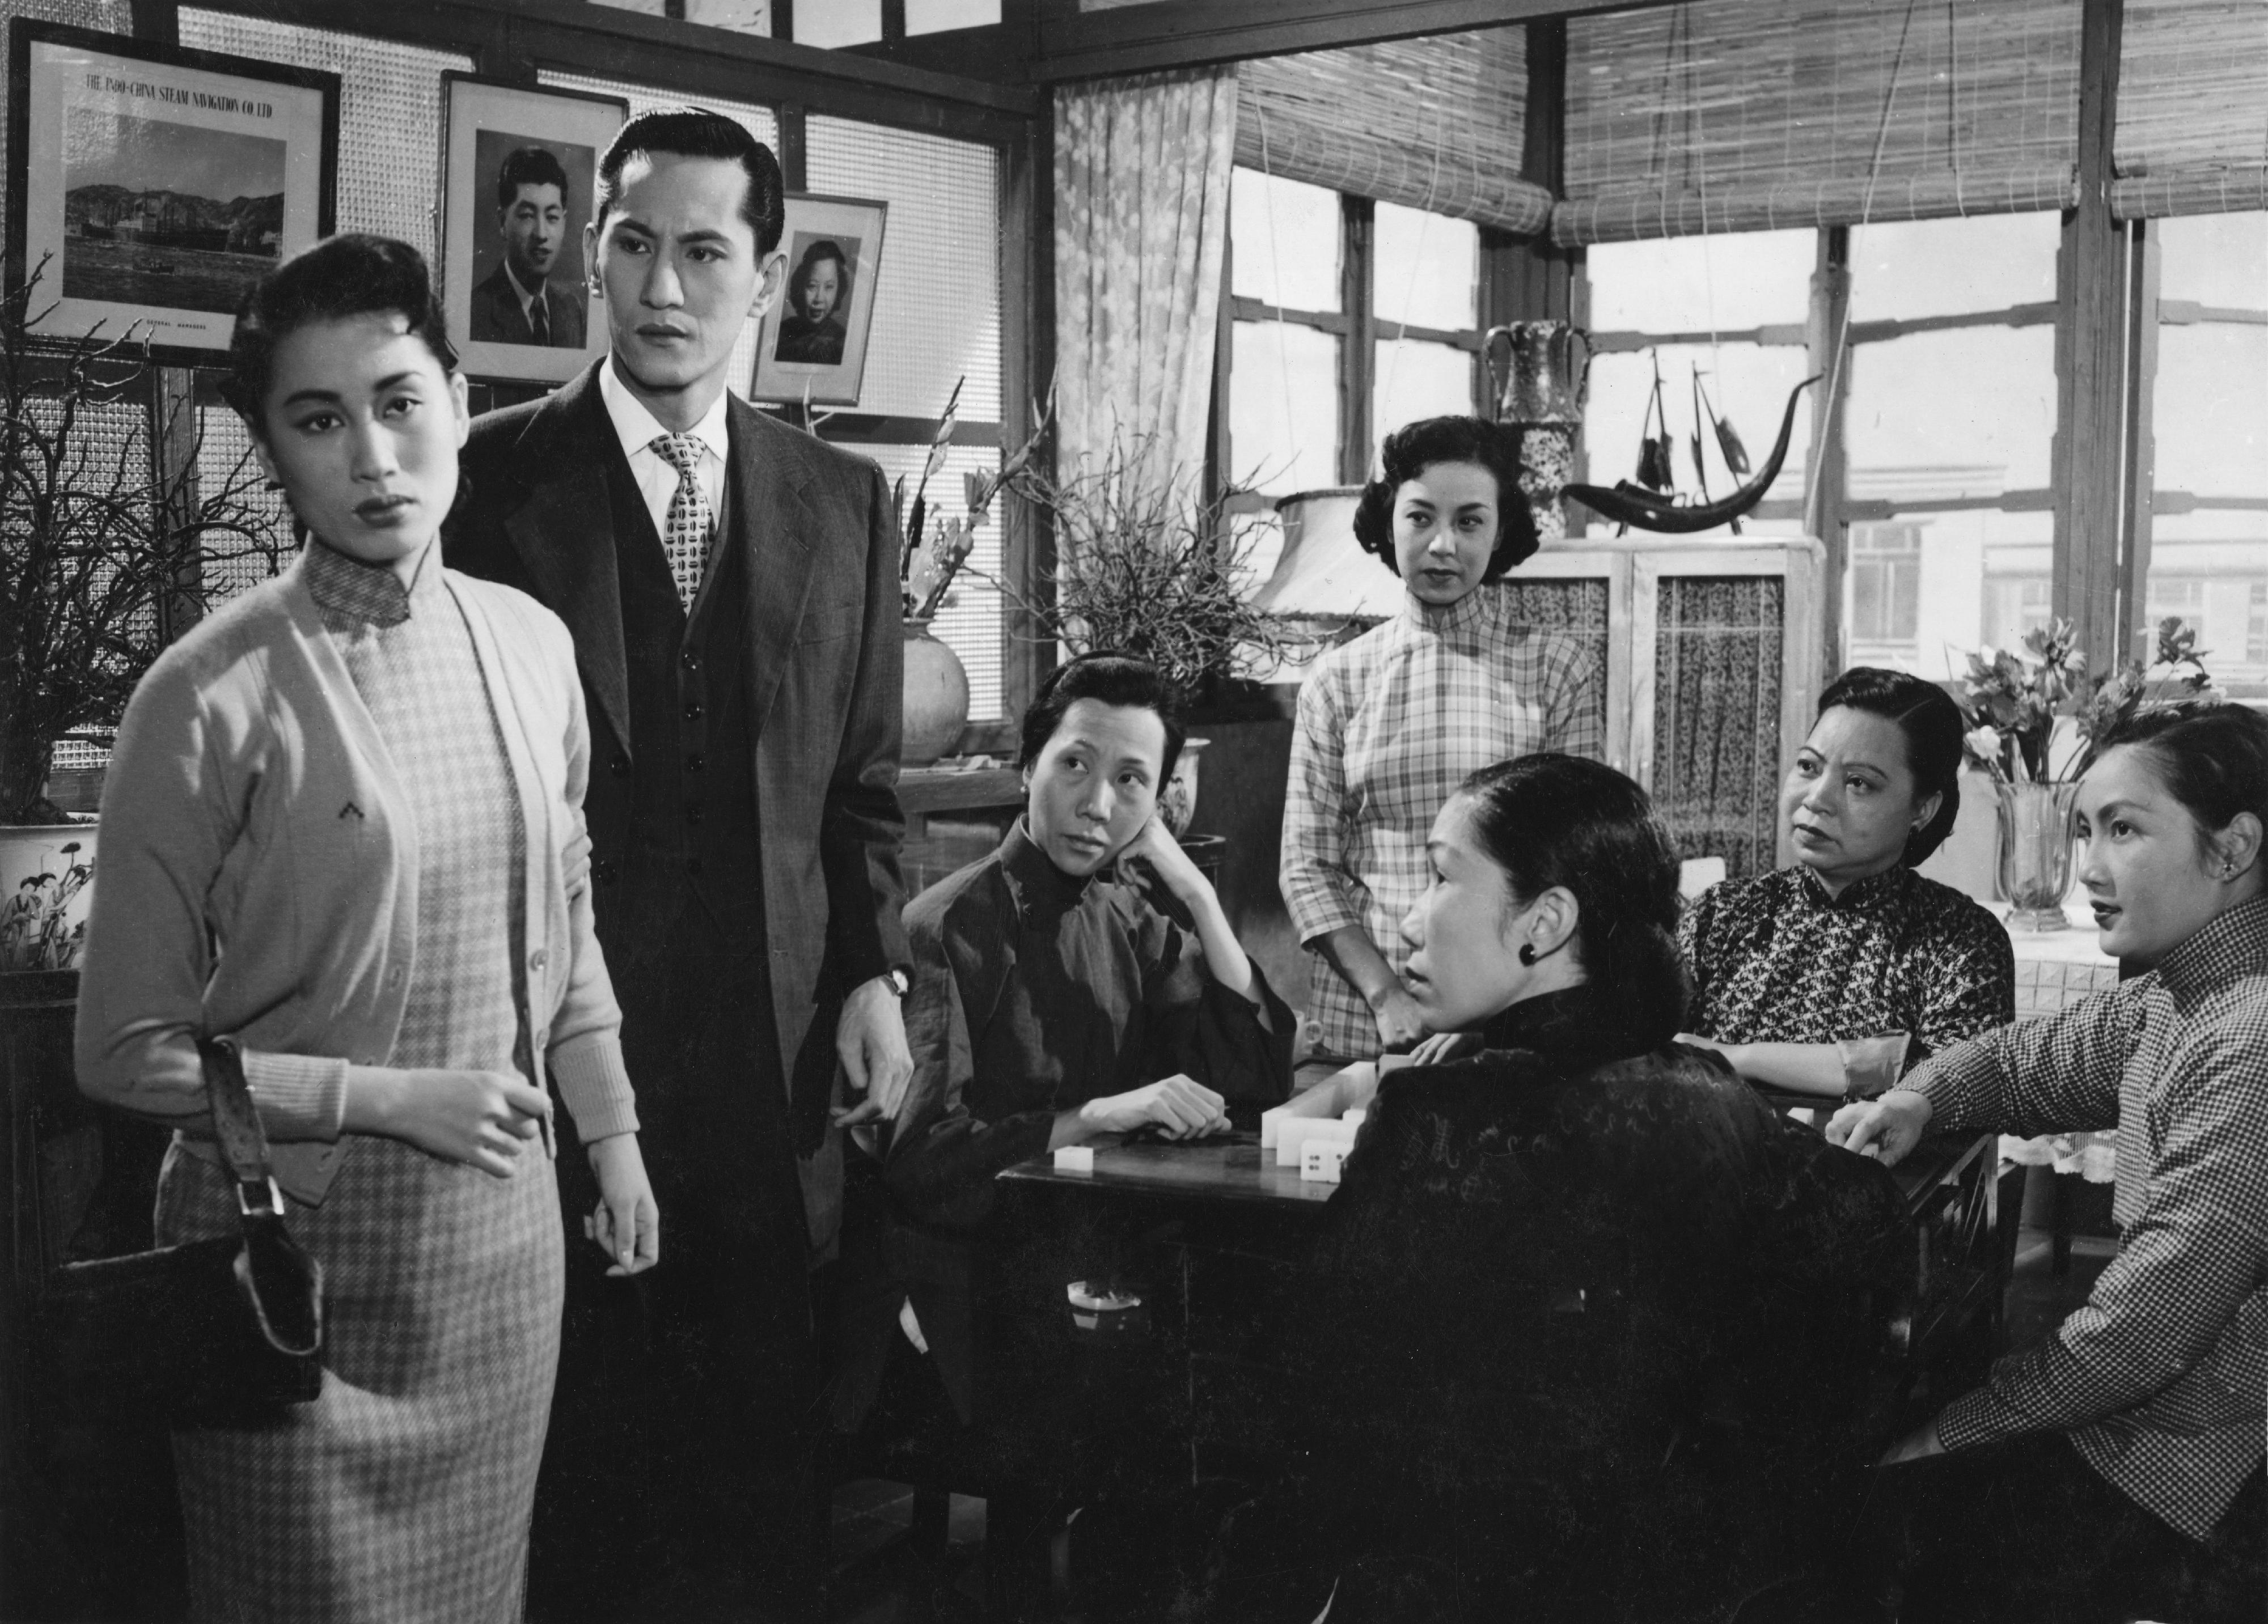 The Hong Kong Film Archive of the Leisure and Cultural Services Department will present a screening programme entitled "Integrating Traditional Morality with Modern Reality: Sil-Metropole Retrospective" from June 23 to September 22, showcasing 16 classic films produced by the Sil-Metropole Organisation. The screening programme is one of the features of the inaugural Chinese Culture Festival. Photo shows a film still from "Mutual Understanding" (1954). (Courtesy of Sil-Metropole Organisation Ltd)